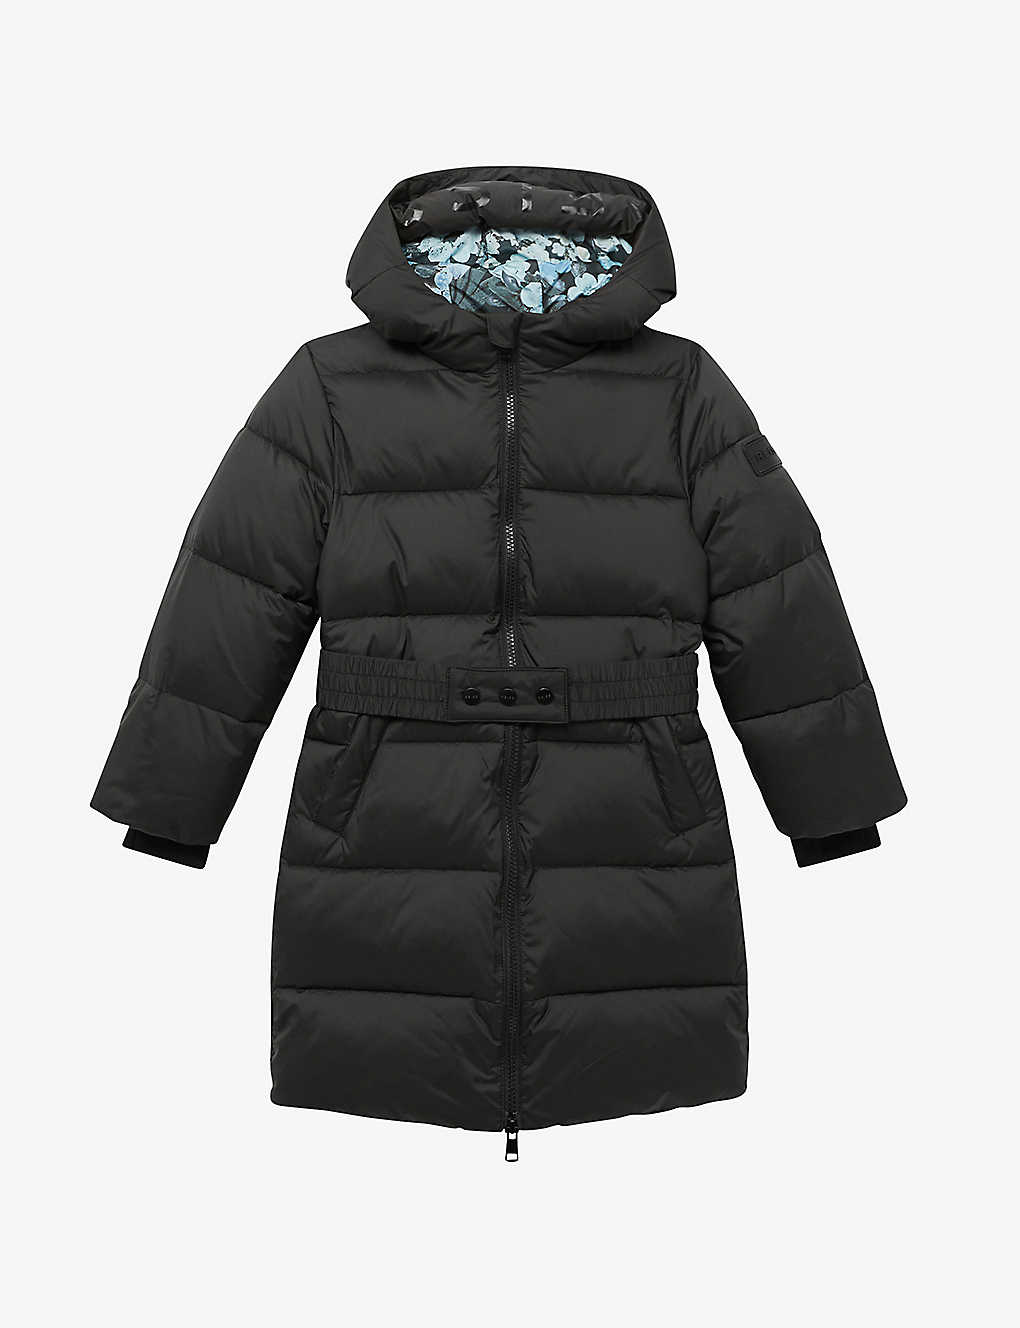 Reiss Girls Black Kids Tia Quilted Longline Woven Jacket 4-9 Years